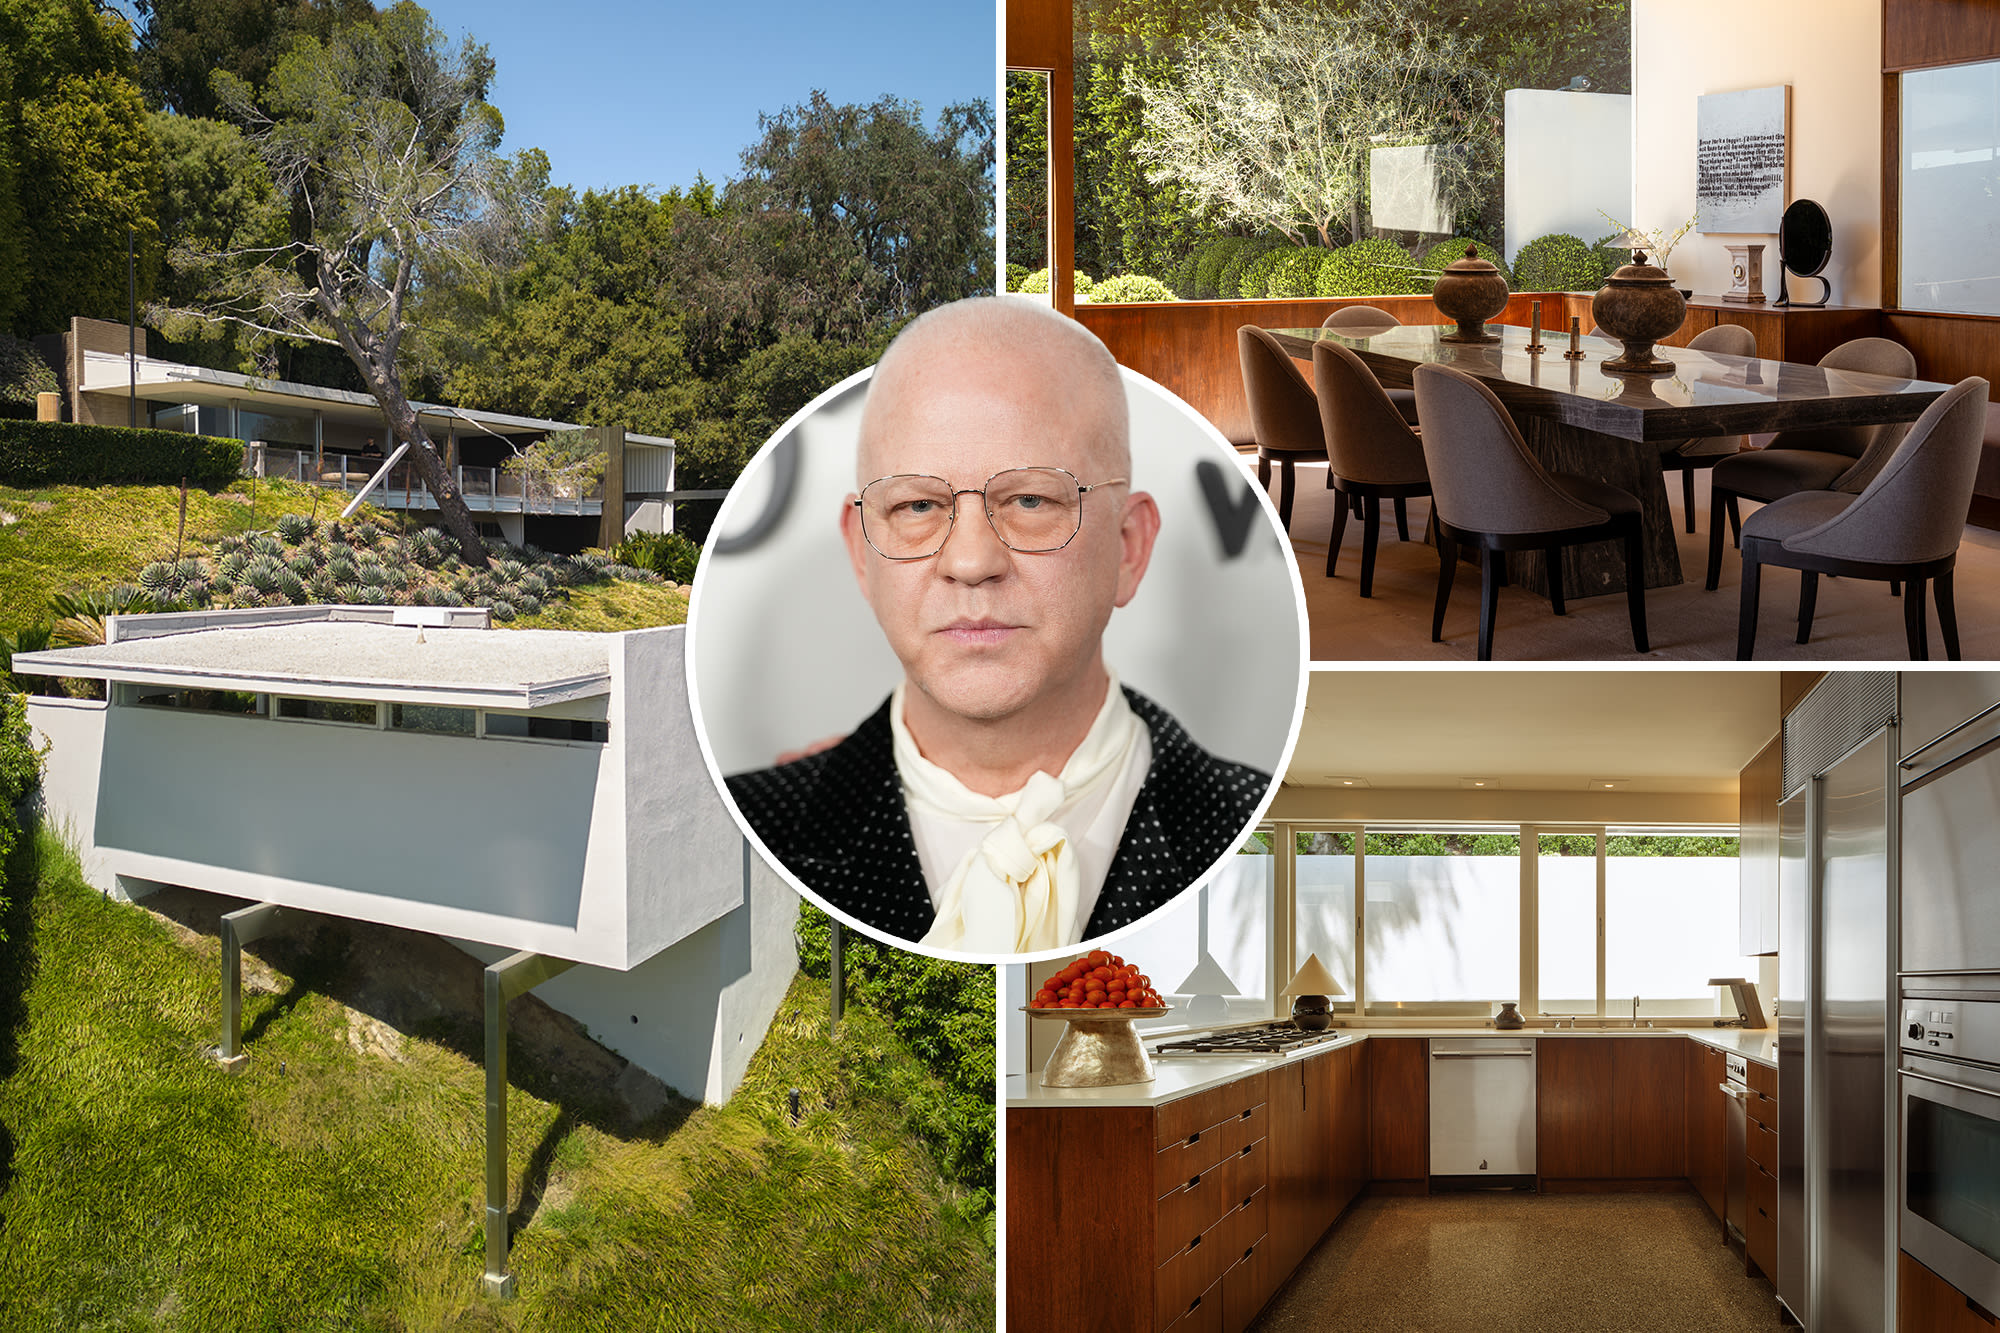 Producer and ‘architecture junkie’ Ryan Murphy lists Richard Neutra-designed LA home for $33.9M